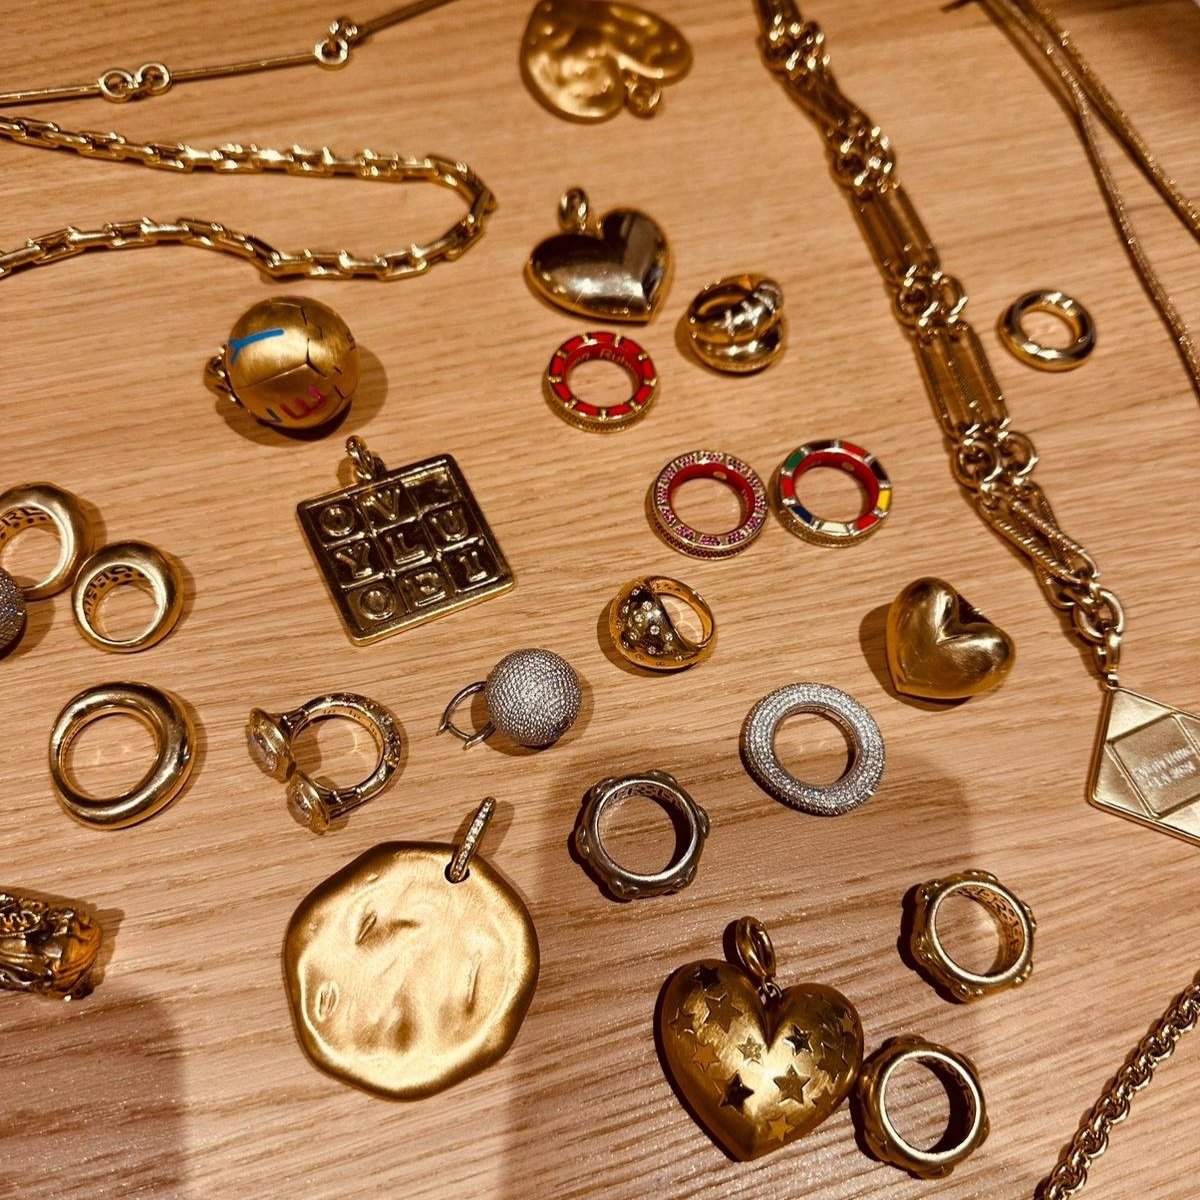 Some of Lauren's personal jewelry pieces